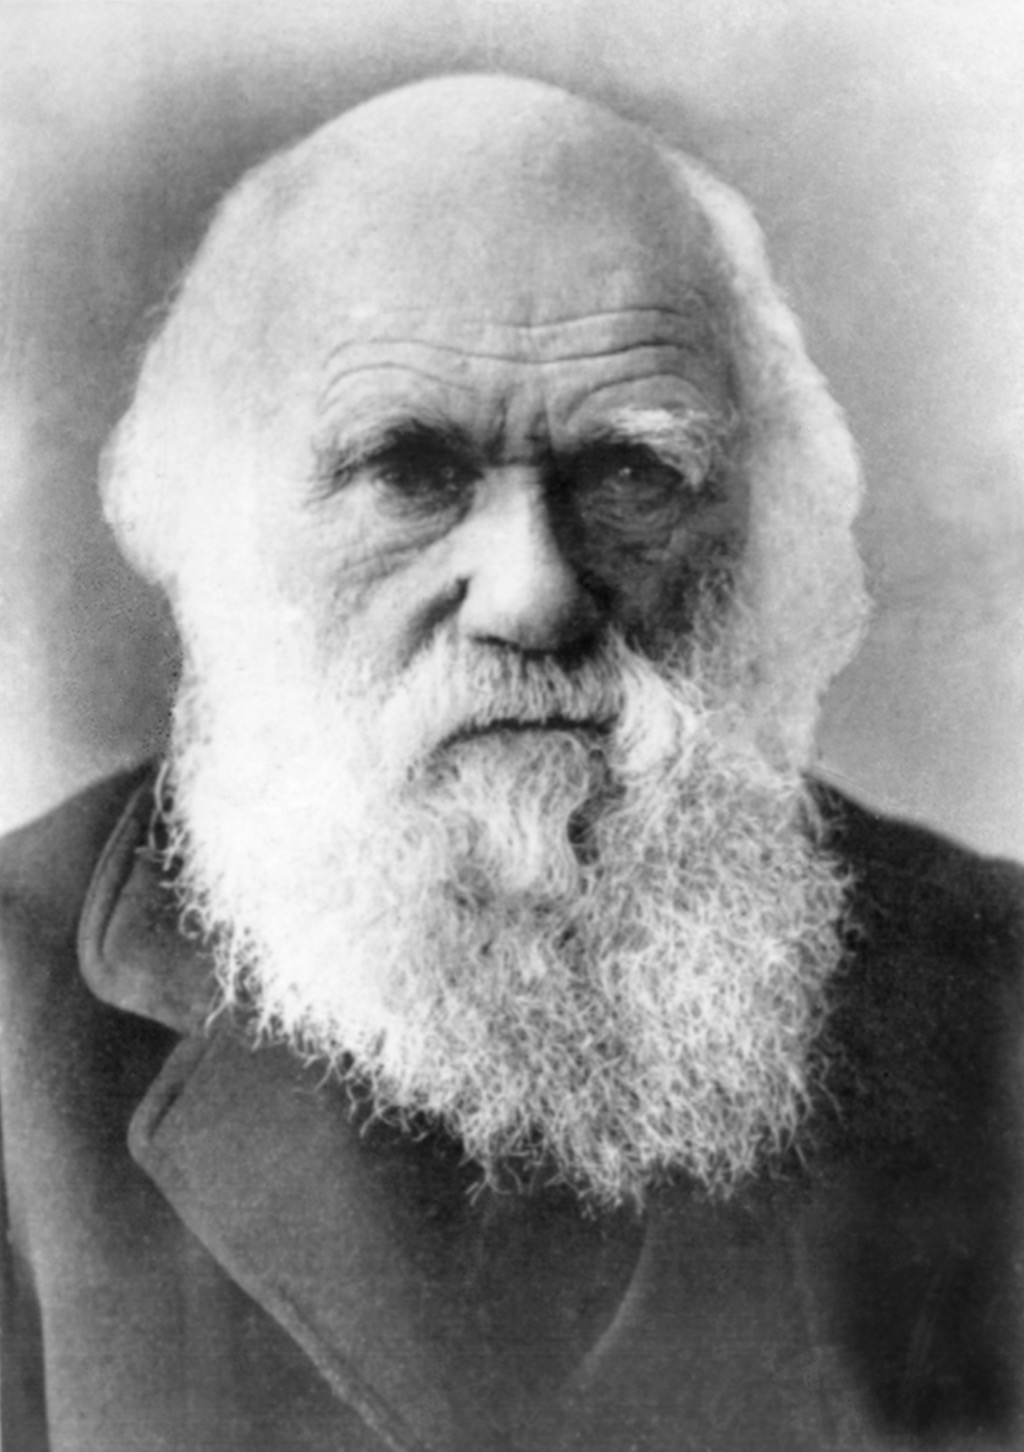 Charles Darwin became famous after 40